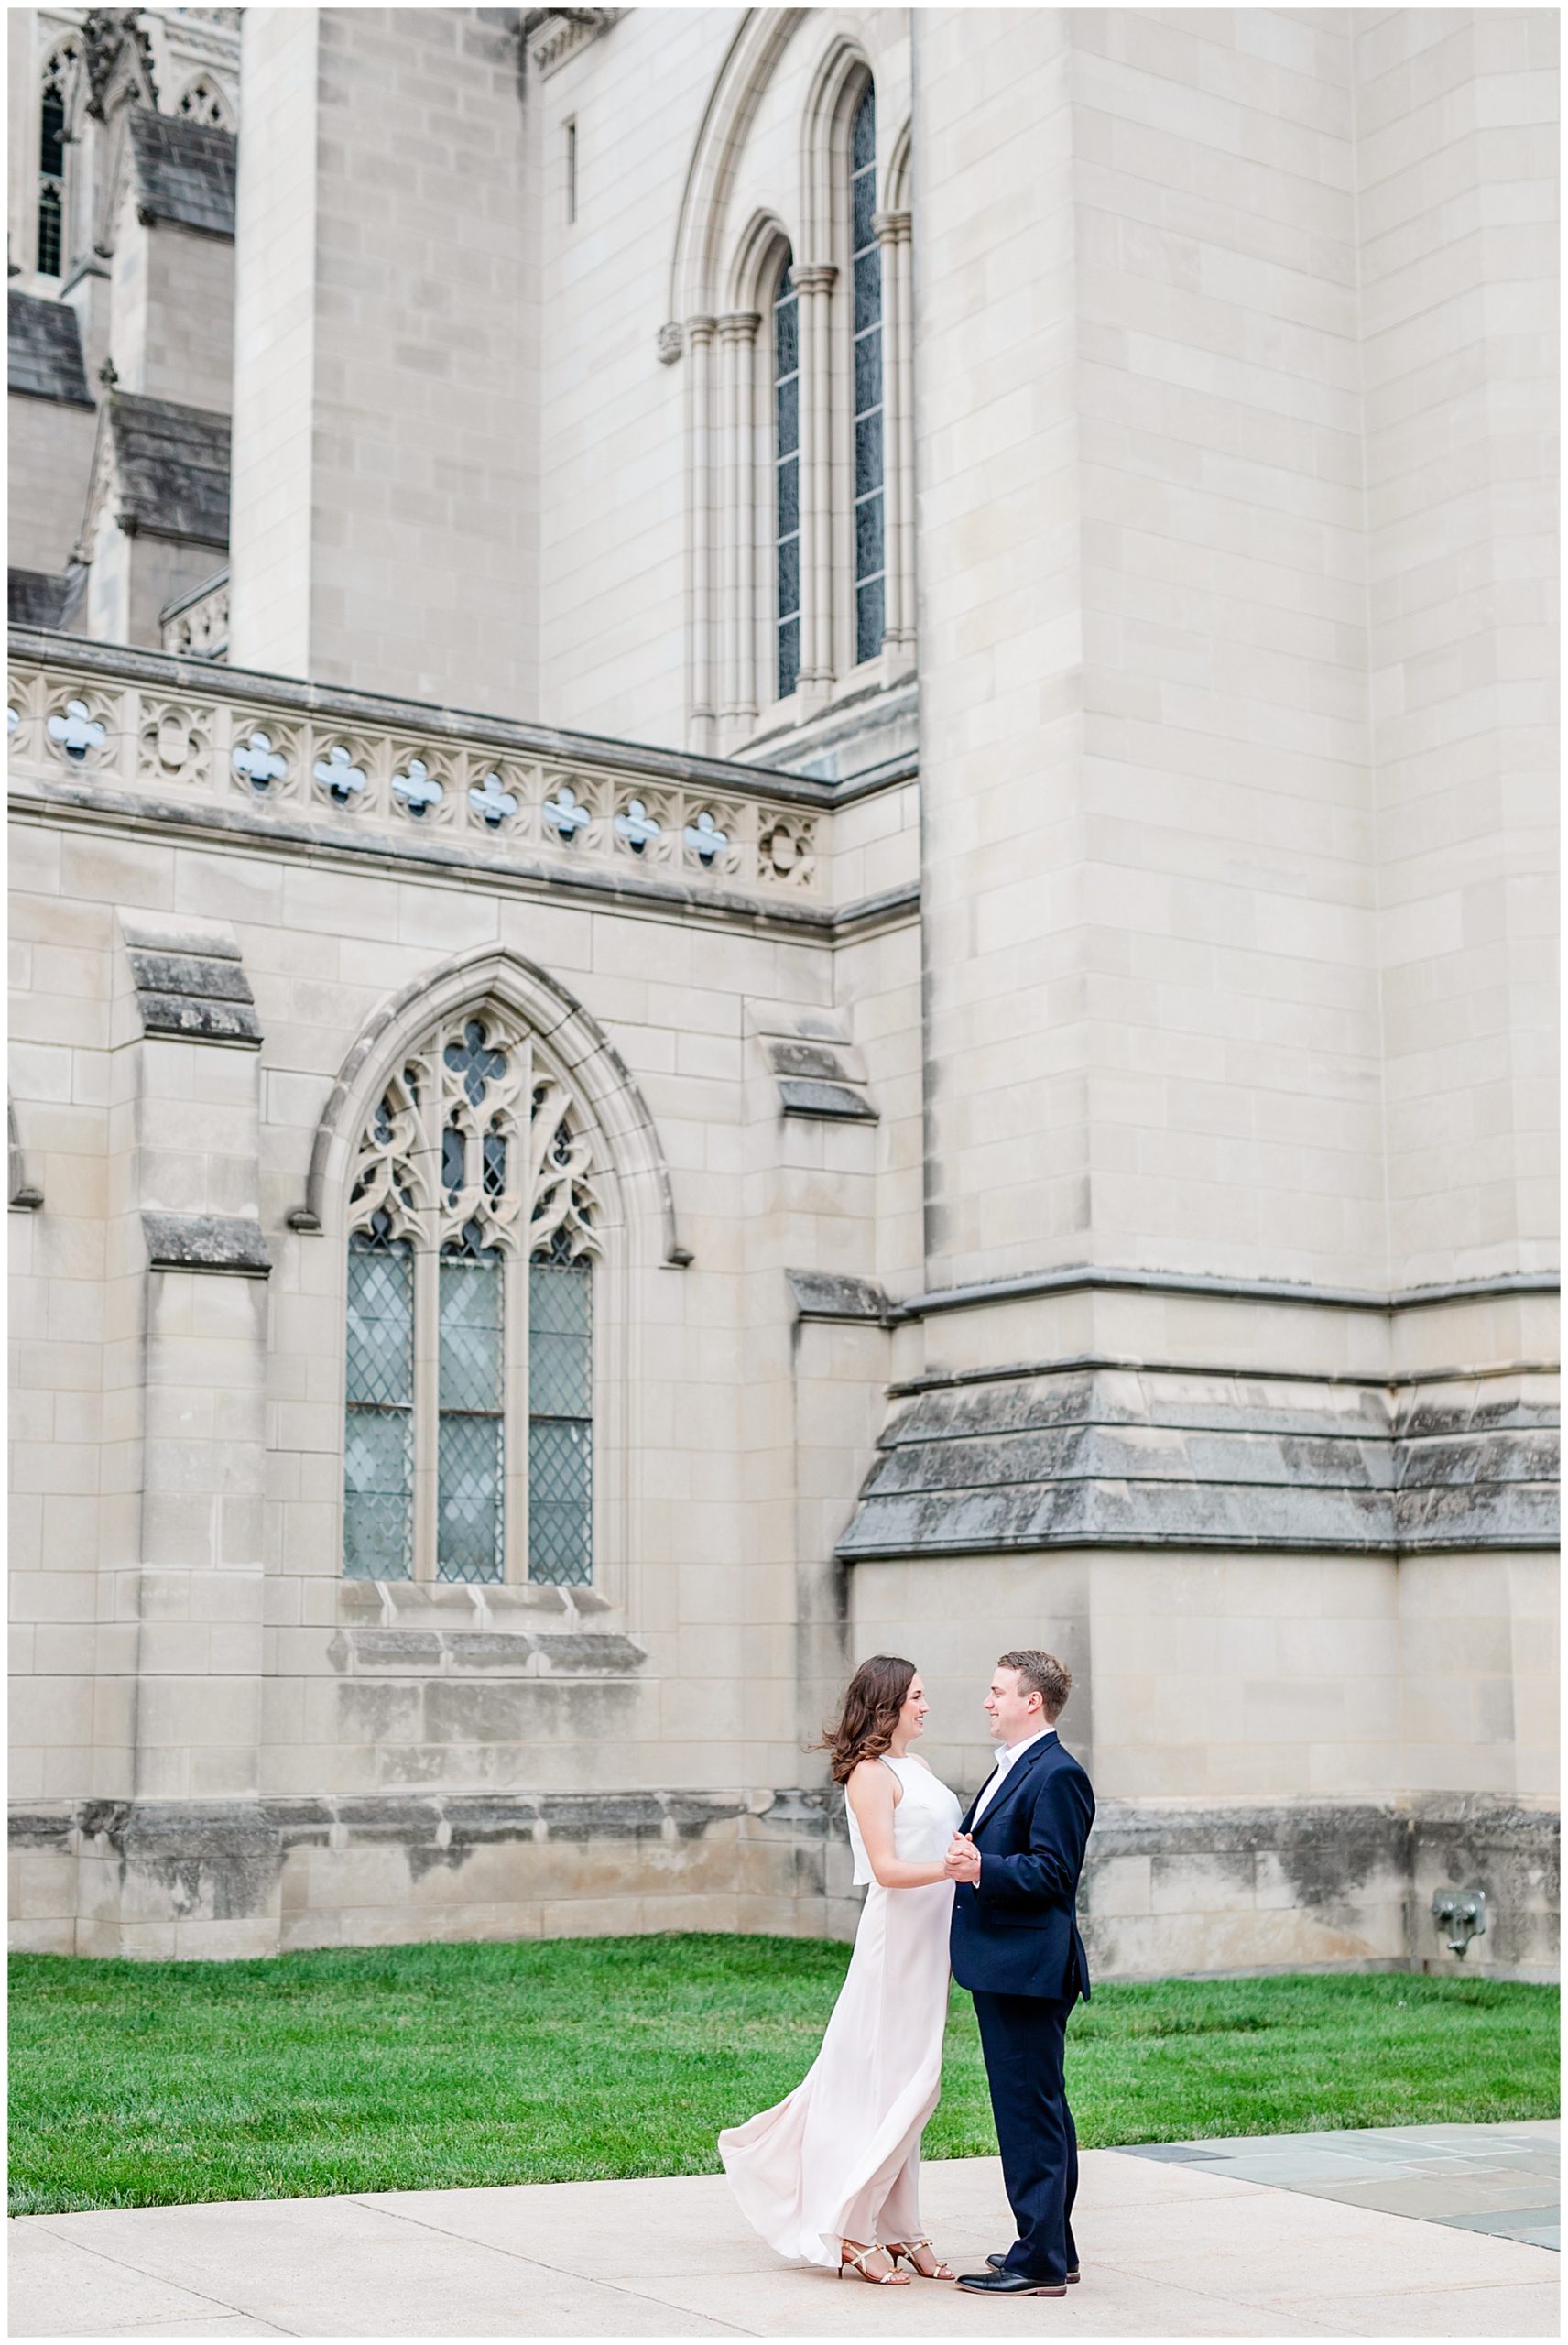 Washington National Cathedral engagement photos, DC engagement photos, National Cathedral portraits, classic DC engagement photos, summer engagement photos, DC engagement photographer, DC wedding photographer, DC wedding photography, Rachel E.H. Photography, couple slow dancing outside cathedral